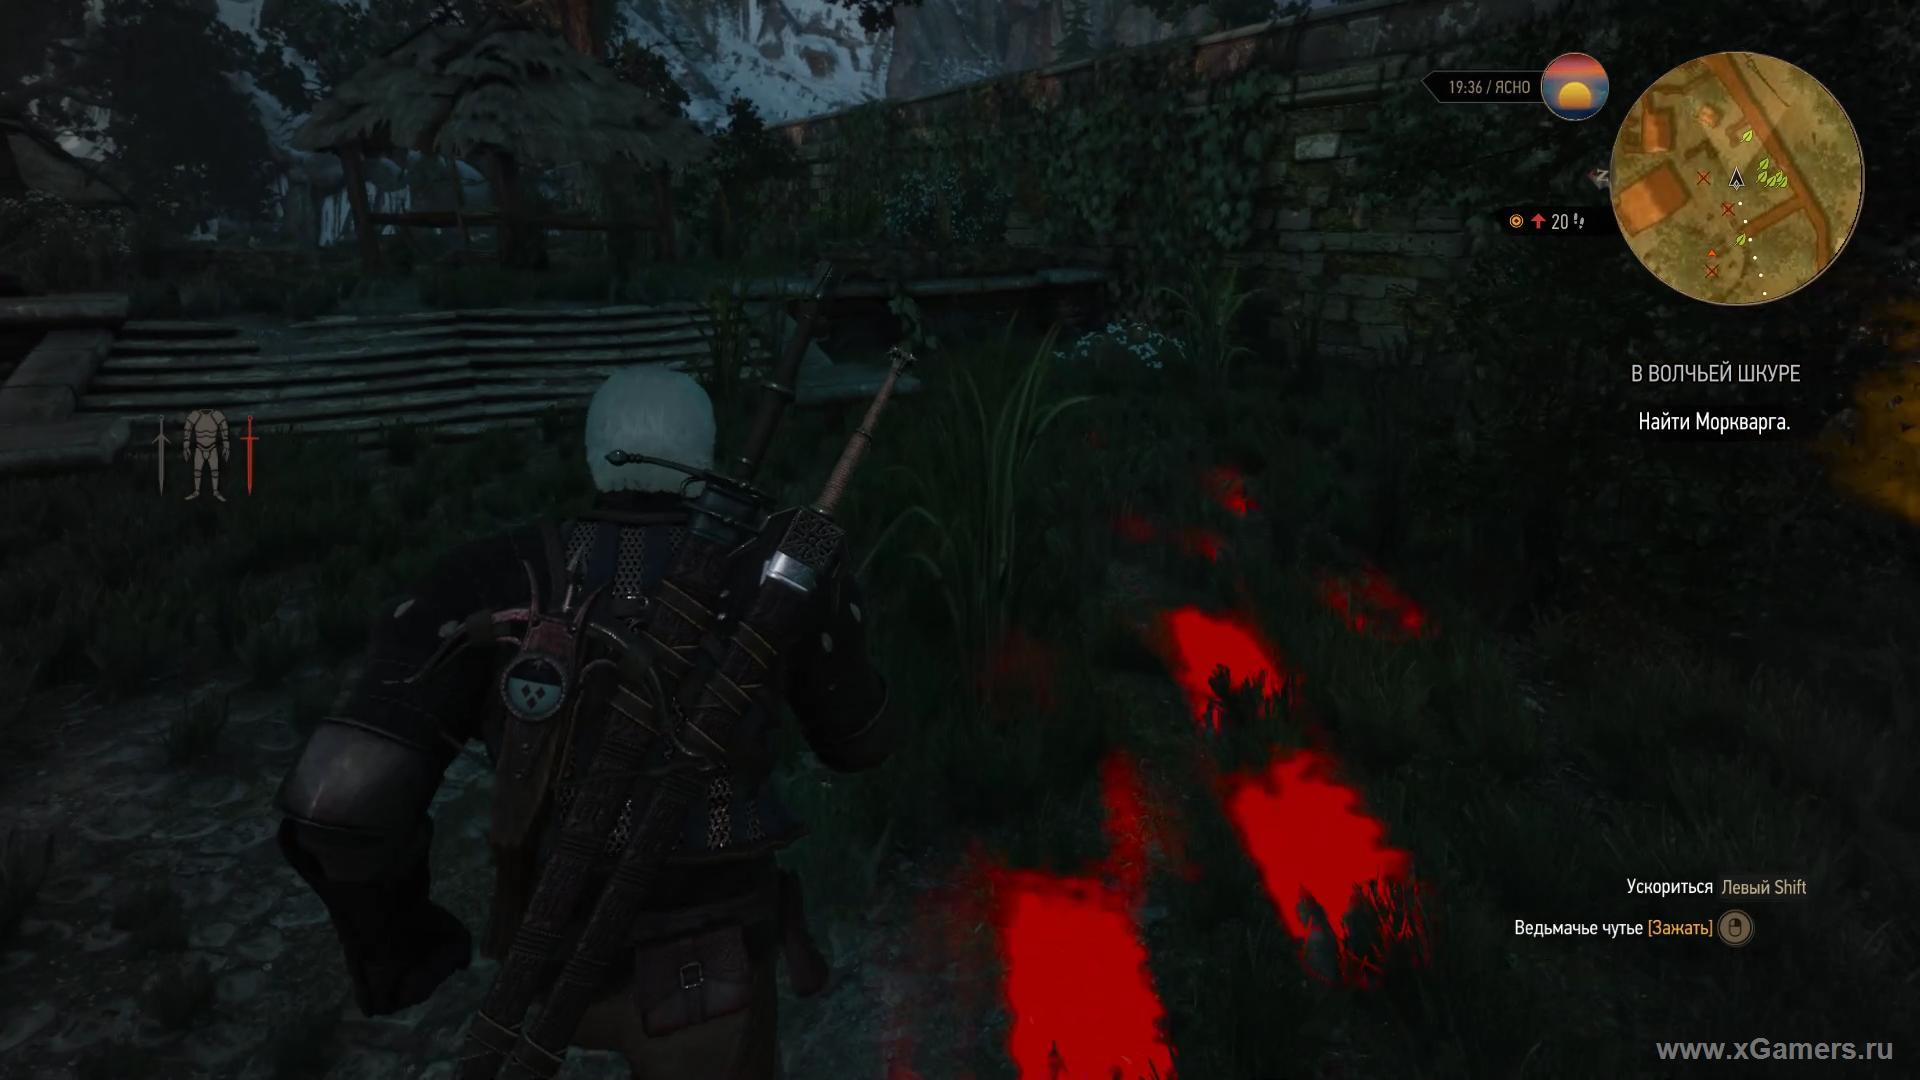 We are looking for an entrance to the Morkvarga cave in The Witcher 3